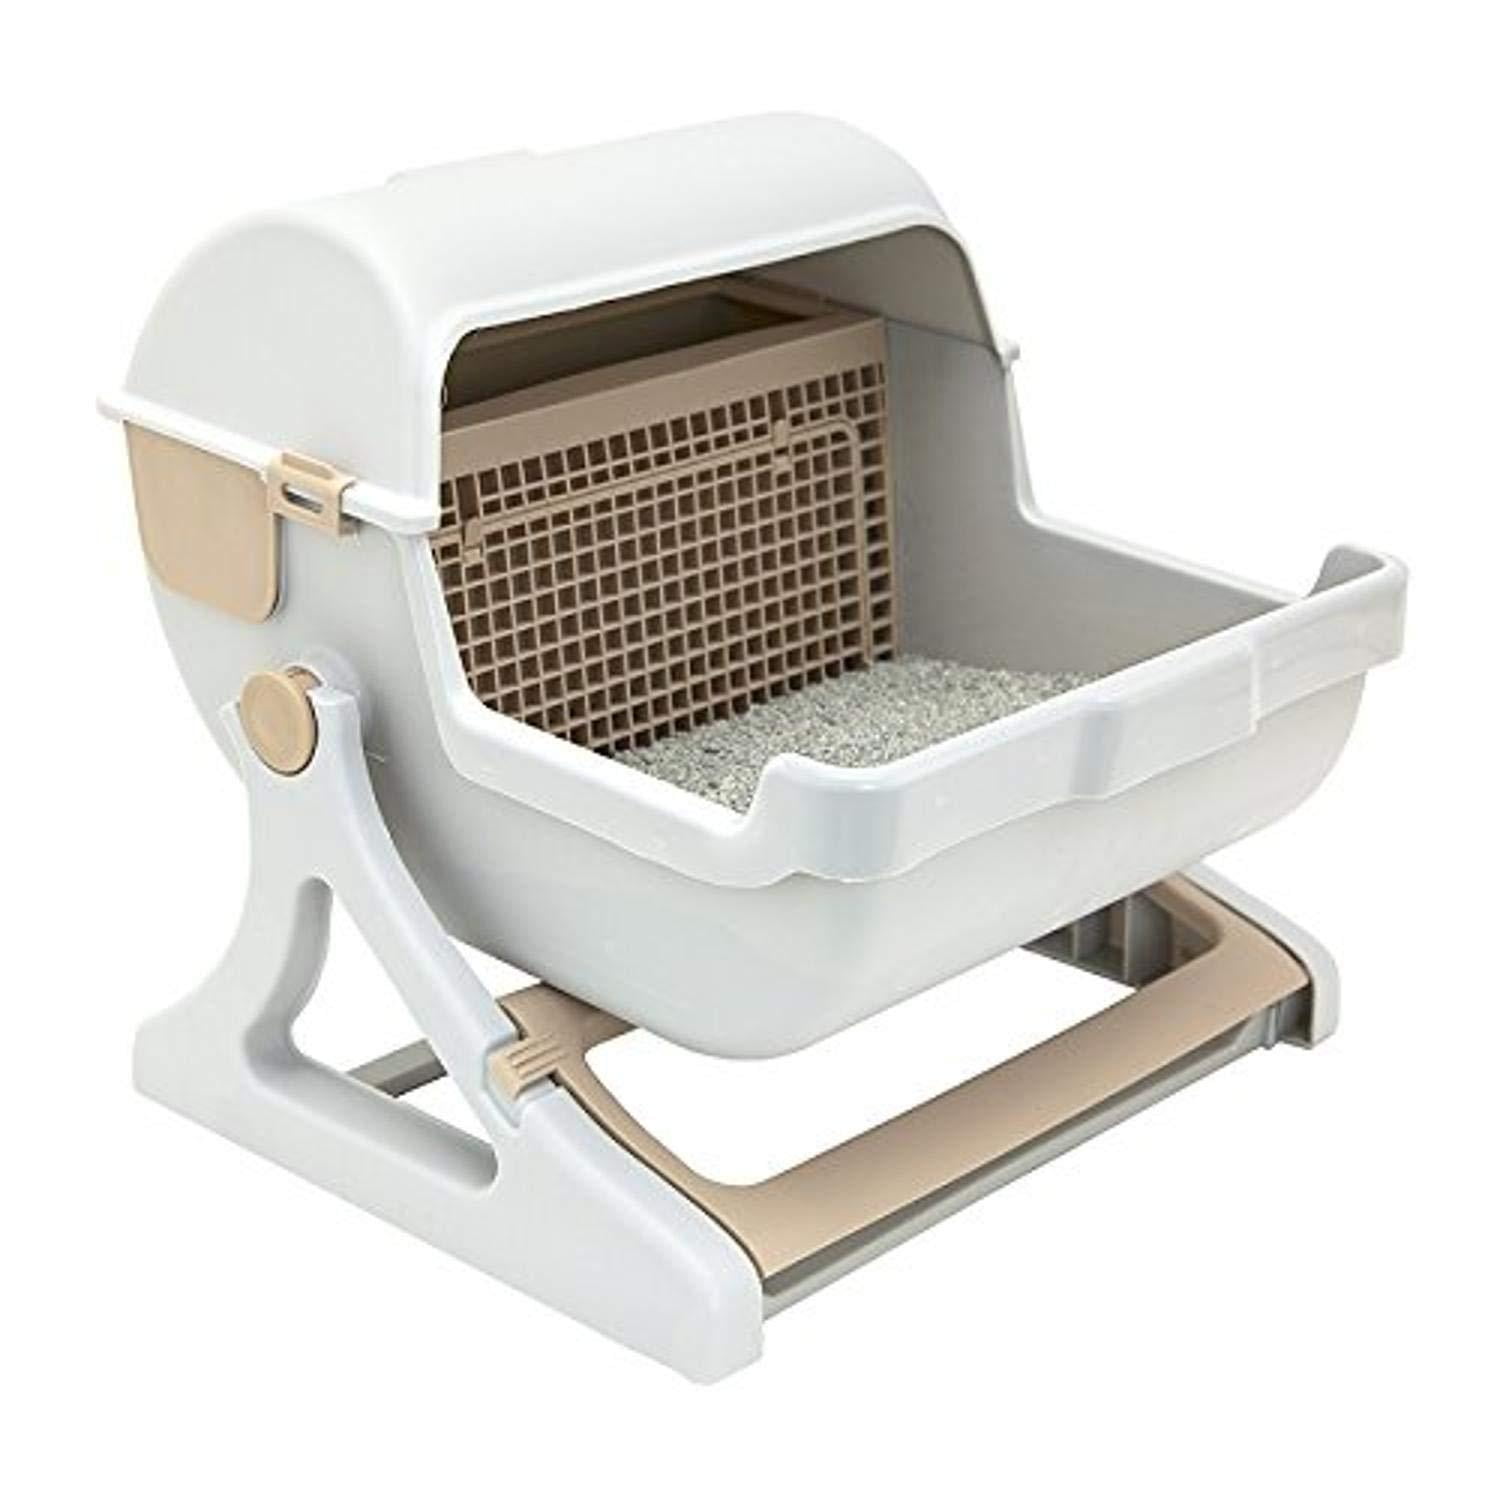 Le you pet semiautomatic quick cleaning cat litter box, Luxury cat